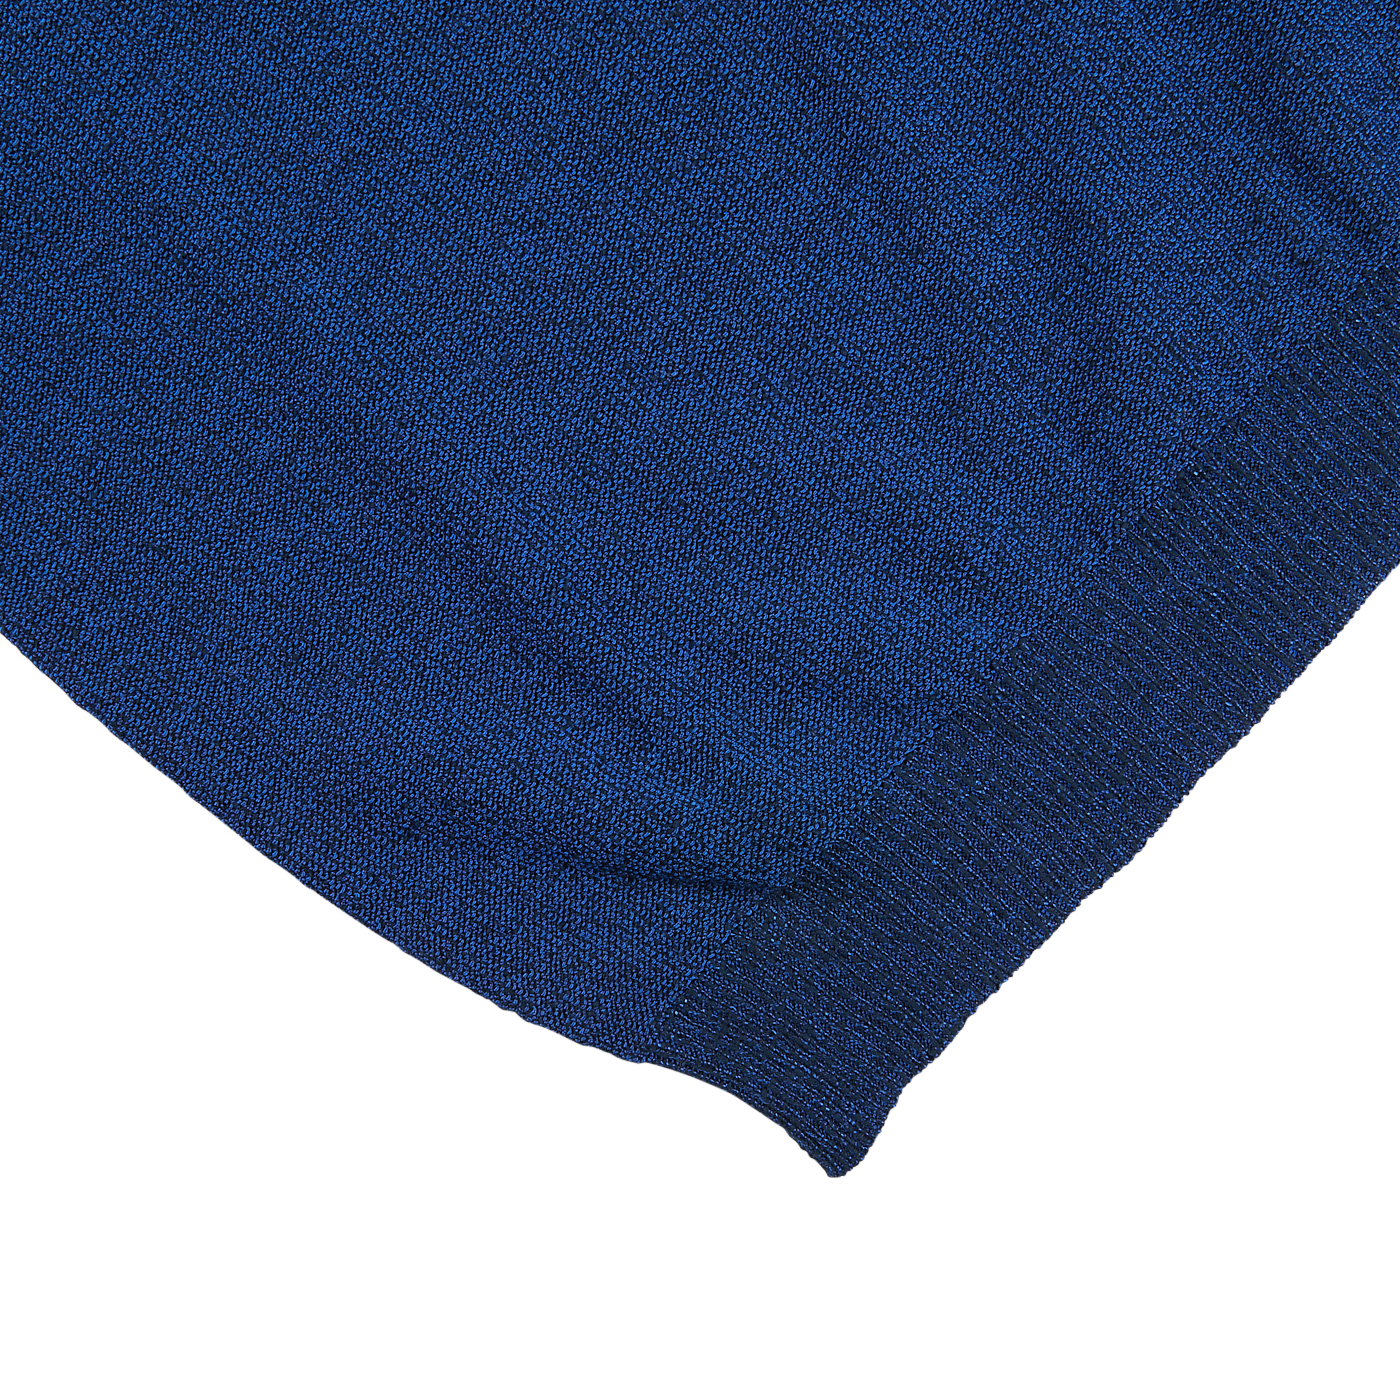 A close up of a Denim Blue Cotton Mouline 1/4 Zip Sweater by Maurizio Baldassari on a white surface.